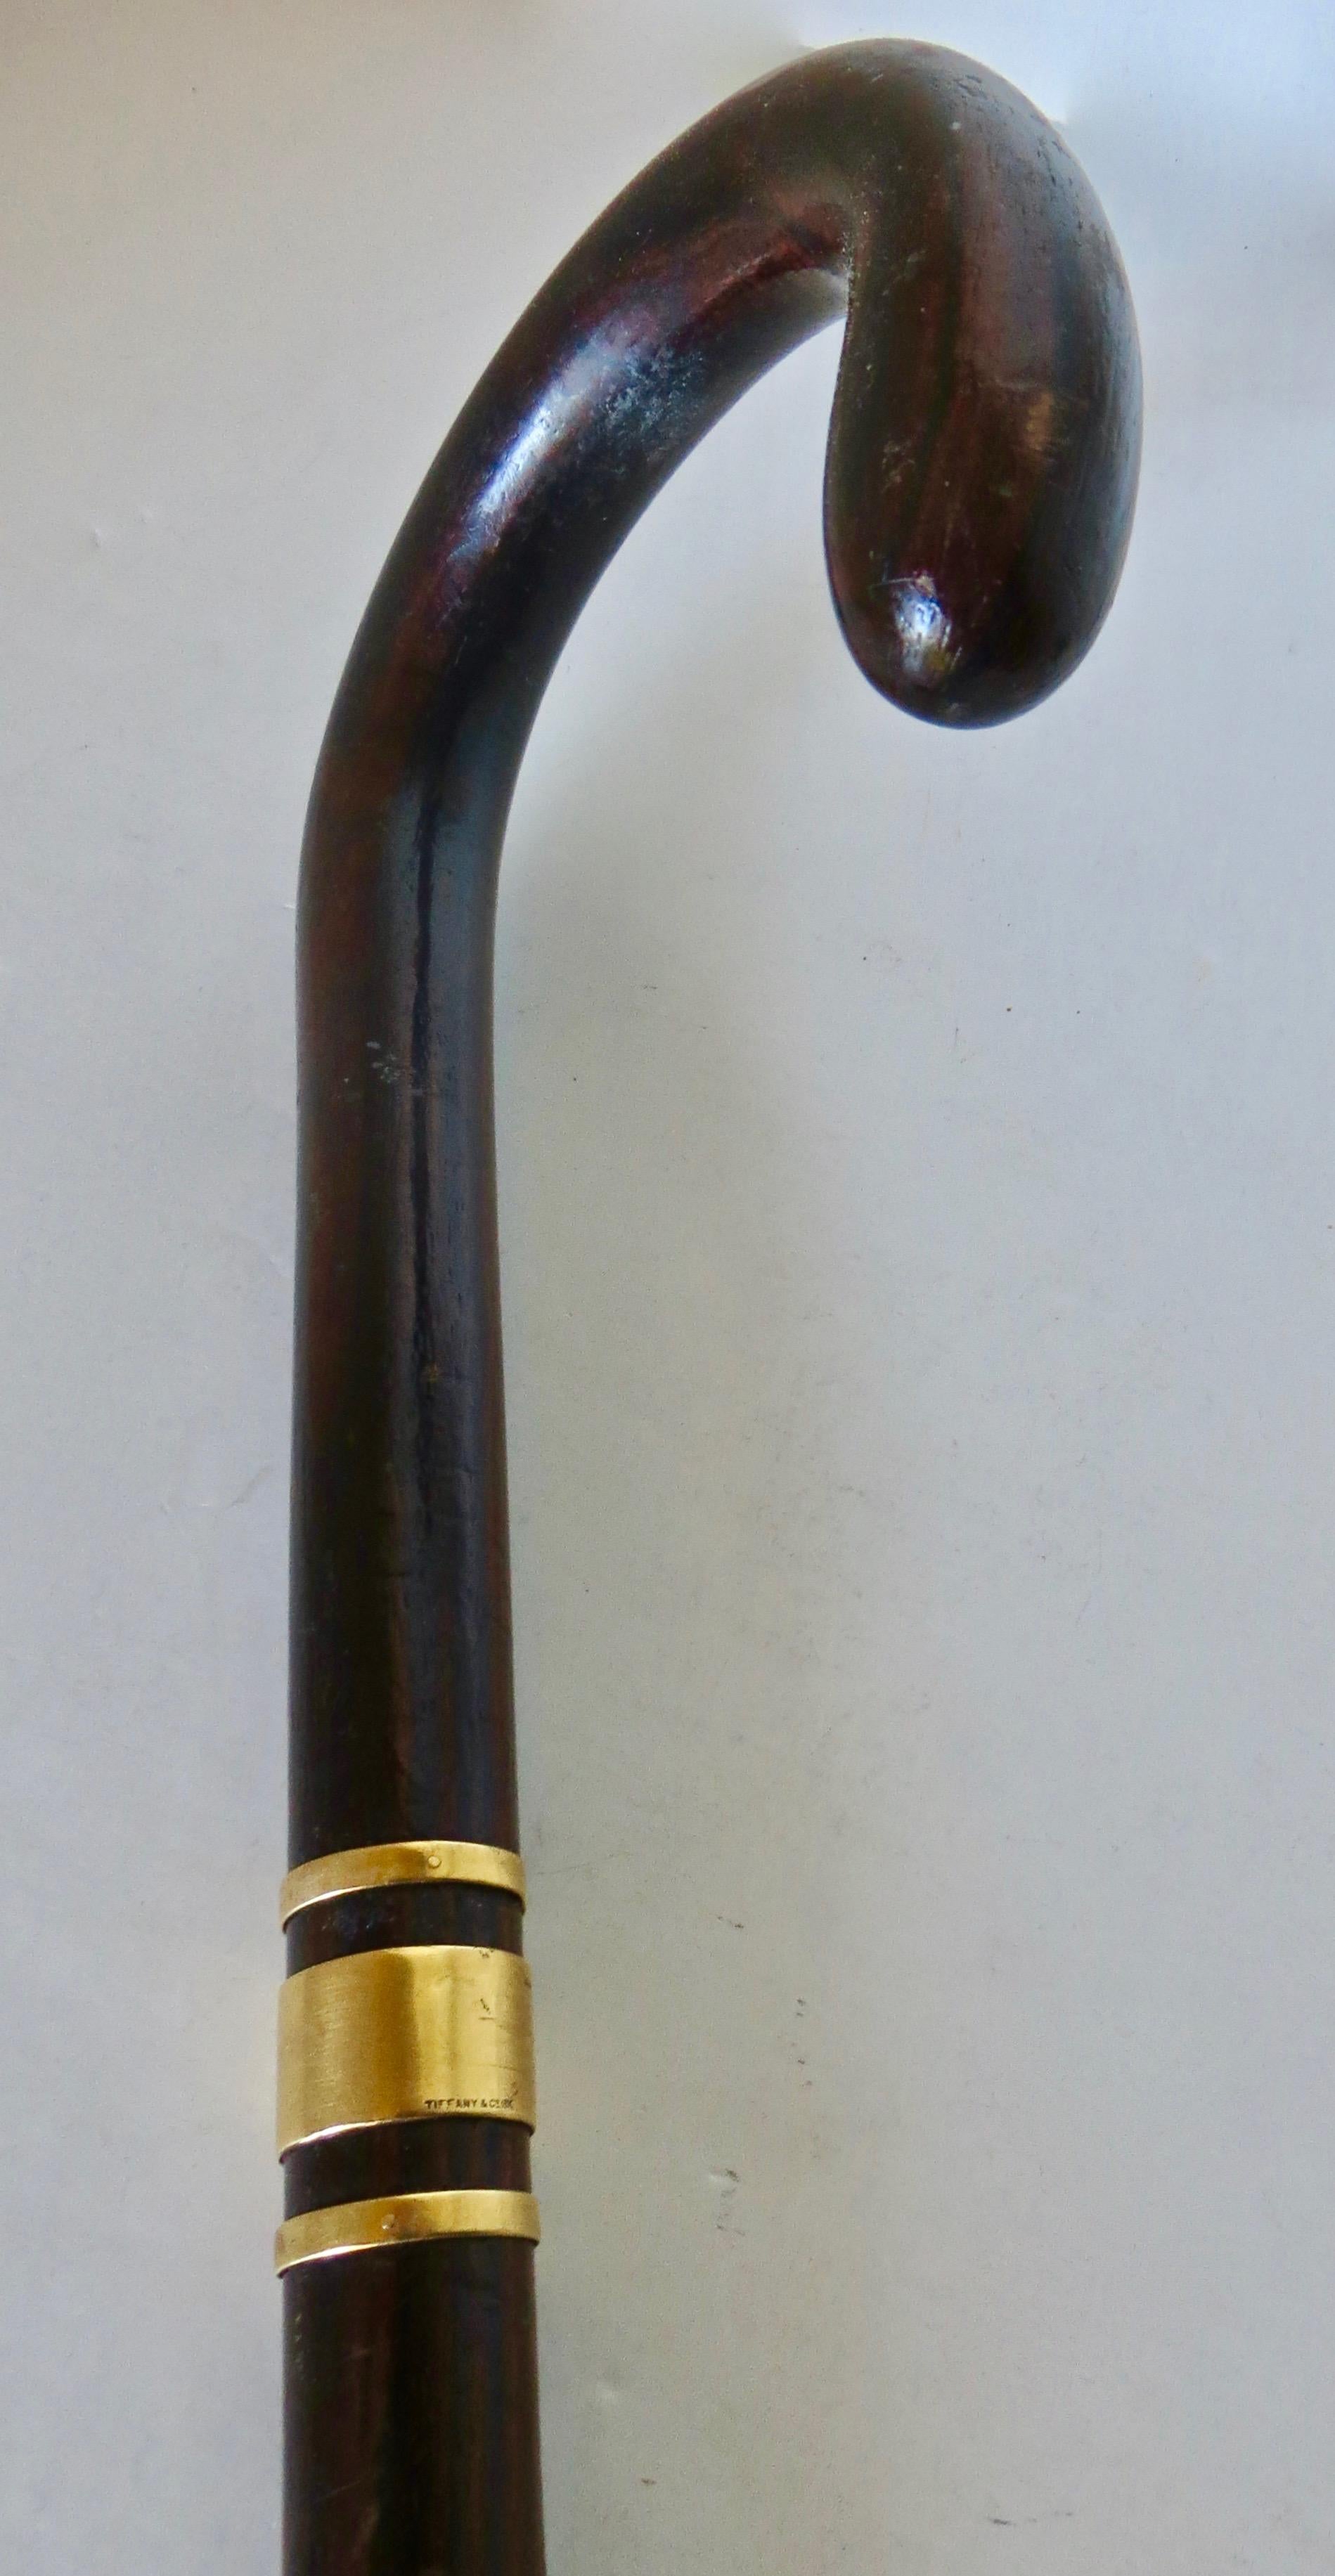 Fine walking stick made by luxury goods maker Tiffany & Co. of New York City; American, circa 1925. Made of fine quality grained black walnut, and standing 36